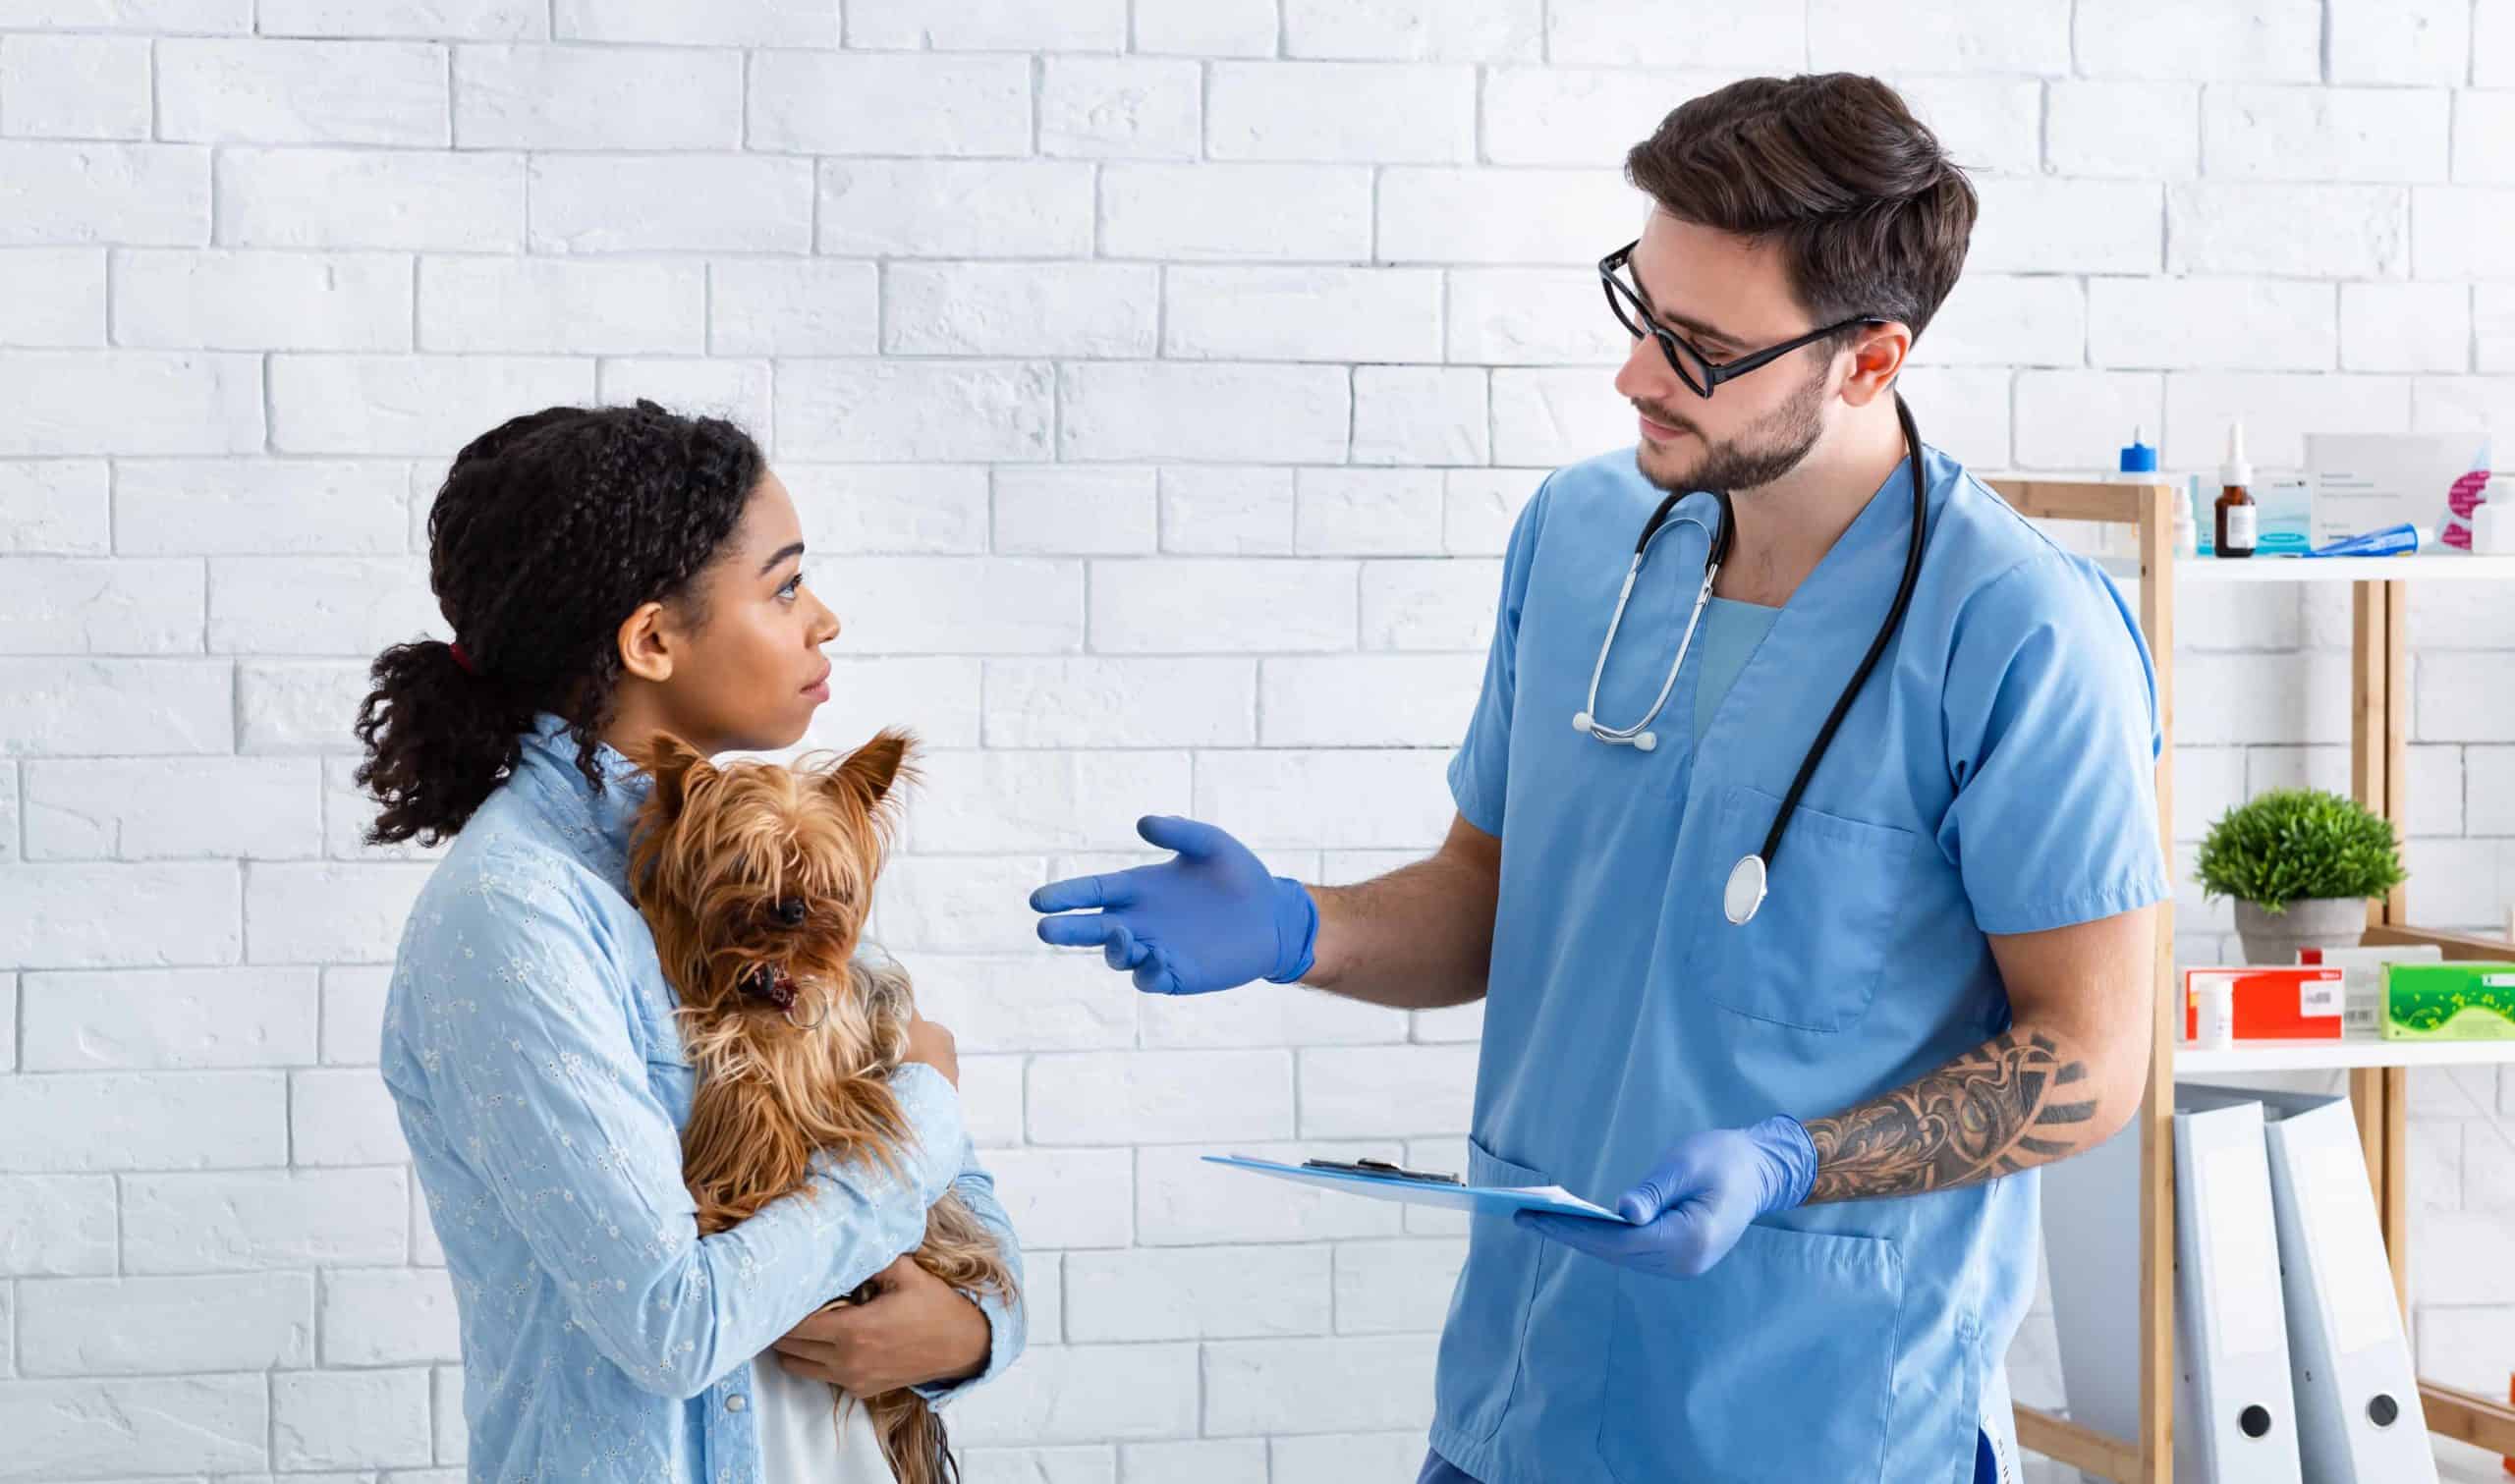 Vet talks to dog owner about her pet. When choosing between pet insurance brands, consider what you and your pet need to choose the one that will work best for you.